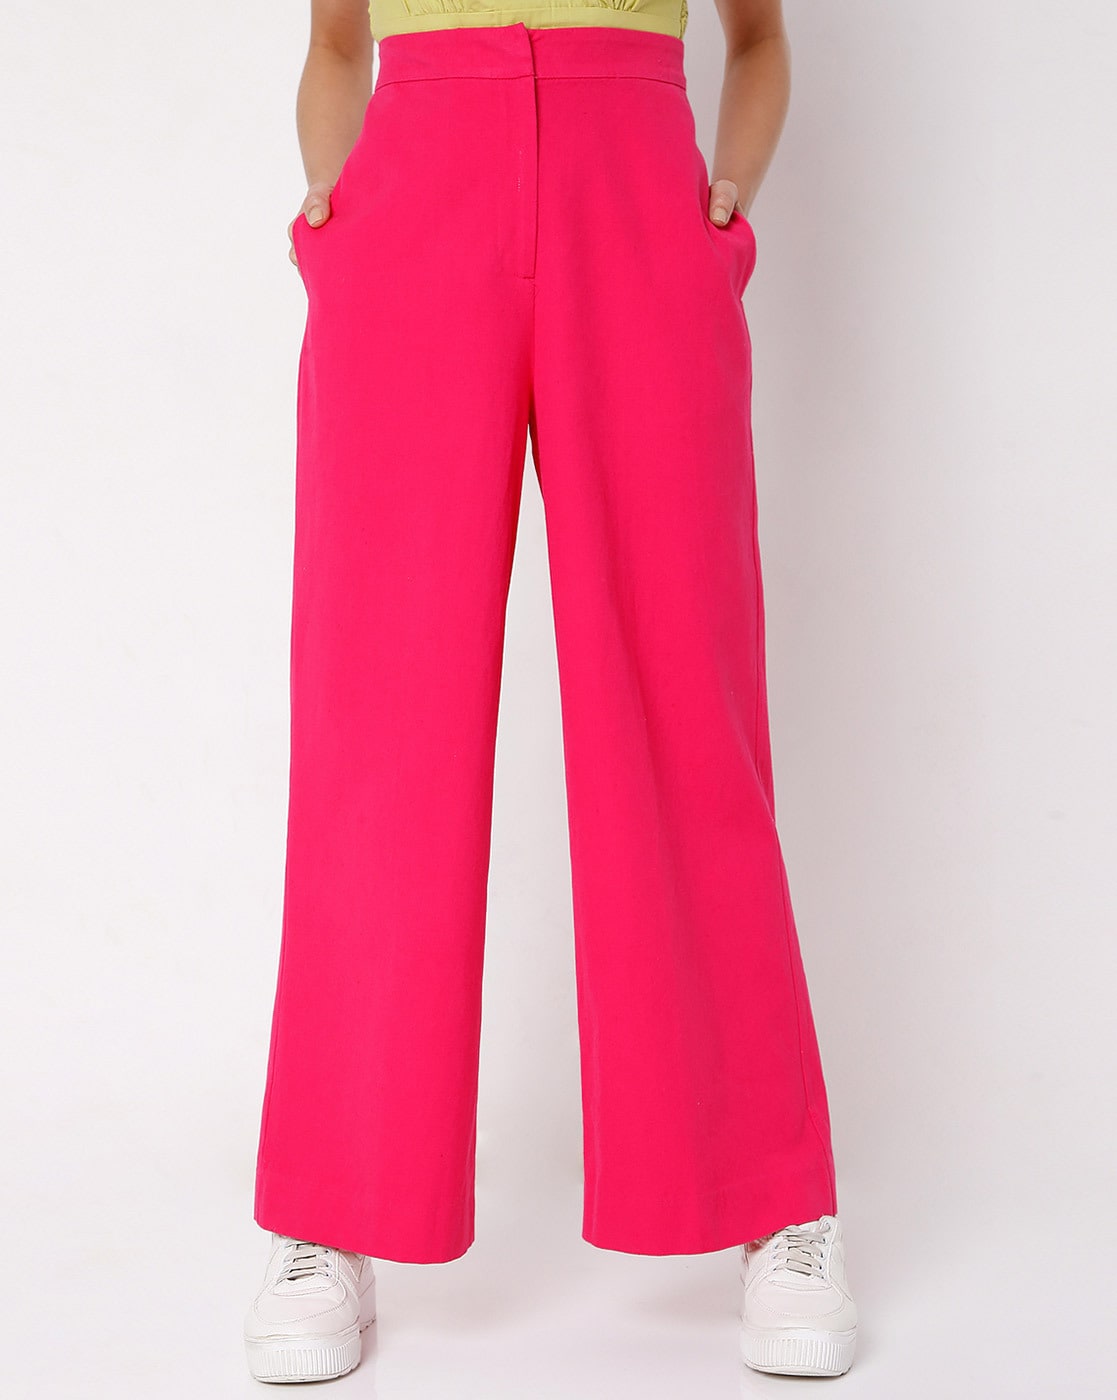 River Island coord wide leg dad trousers in pink  ASOS